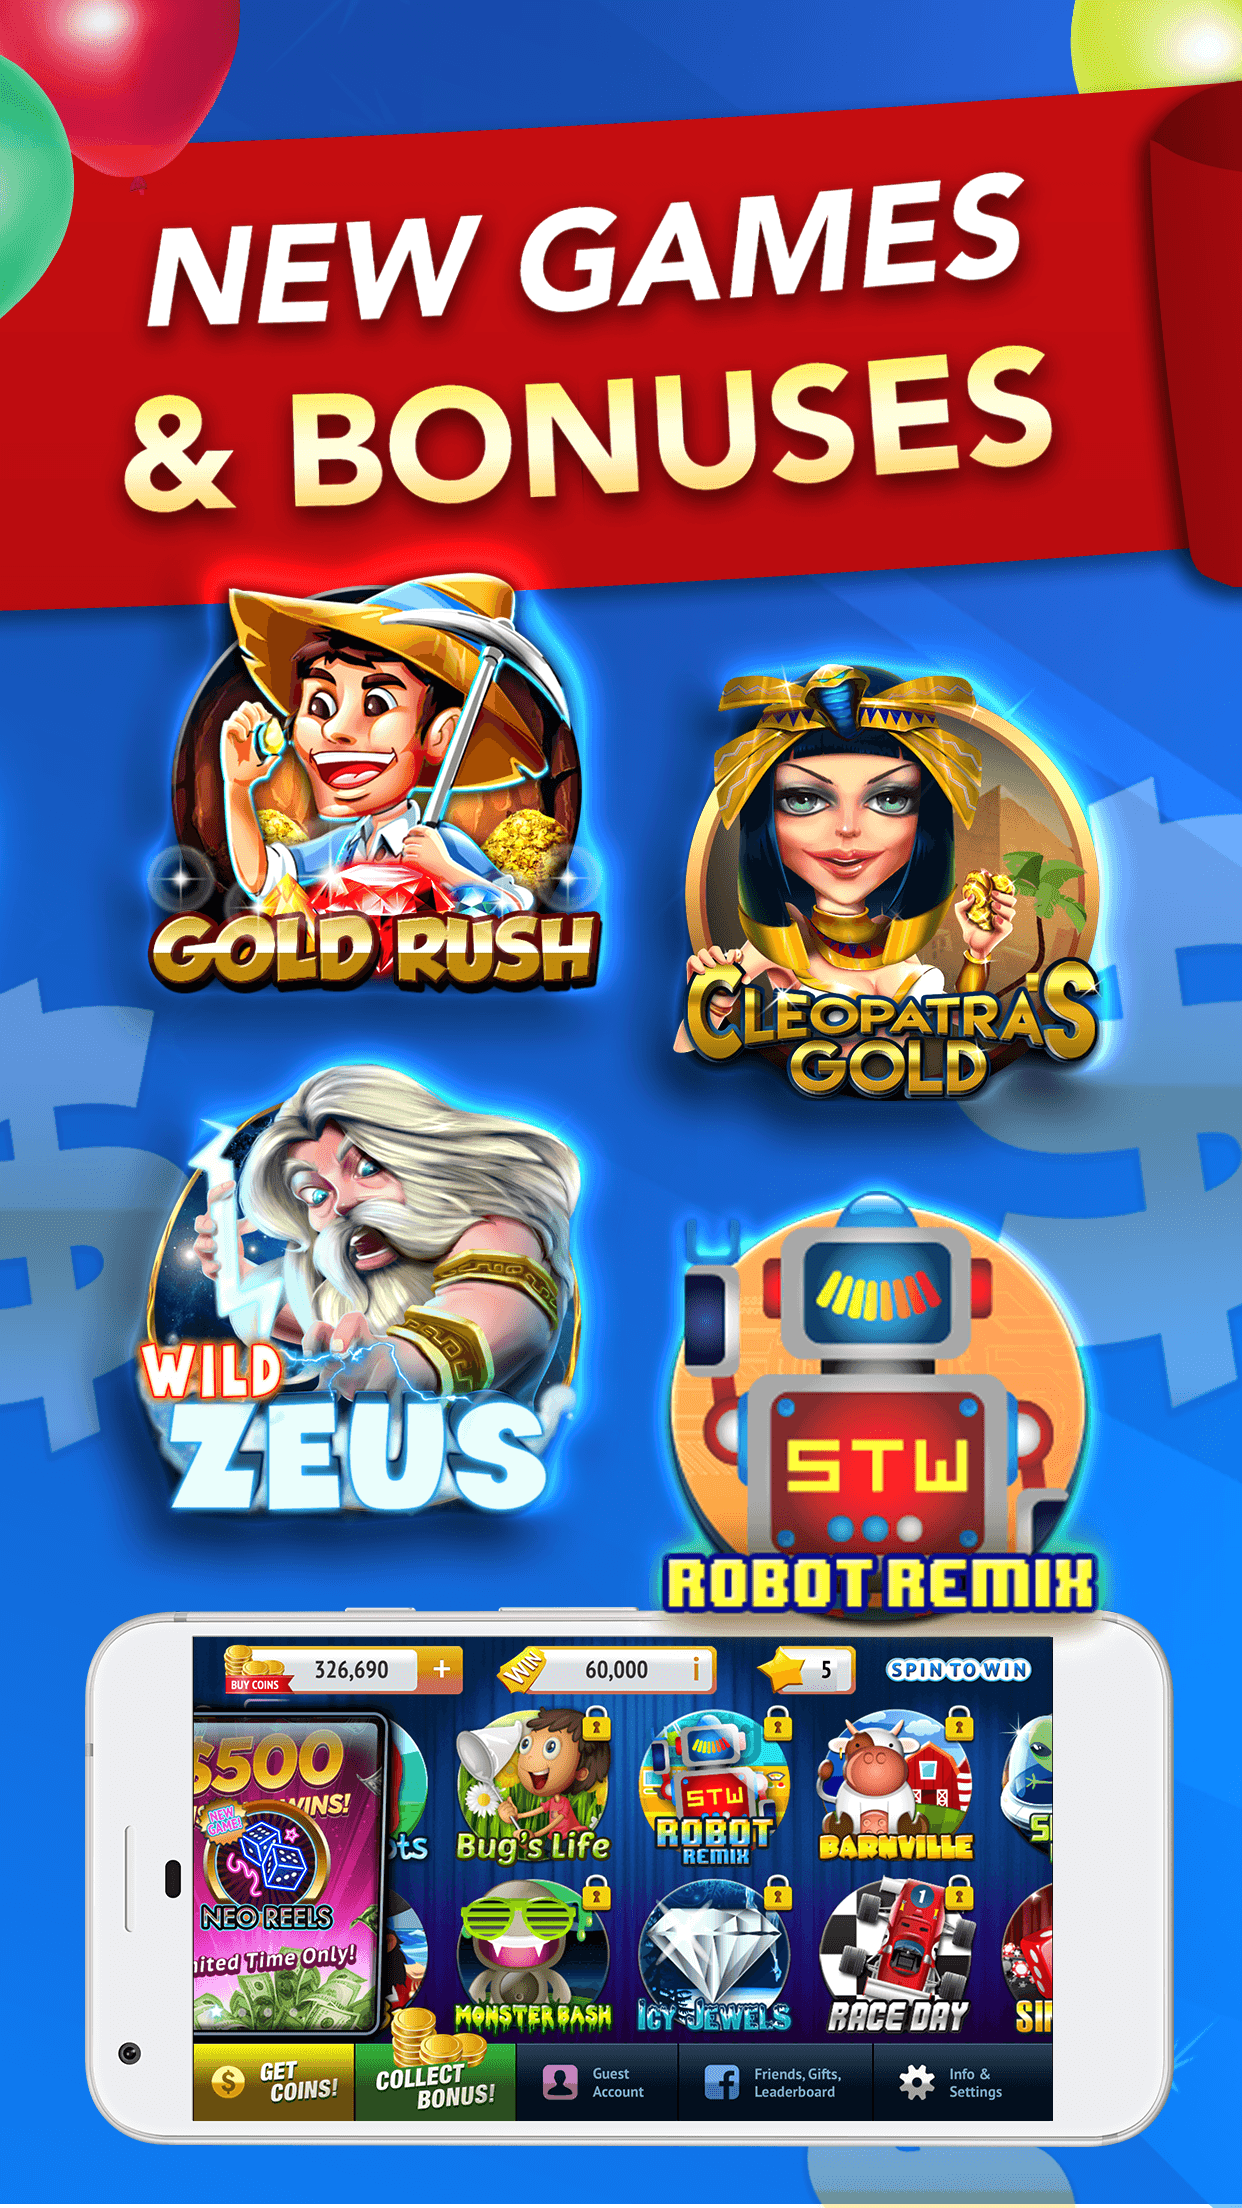 Slot games that you can win real money prizes